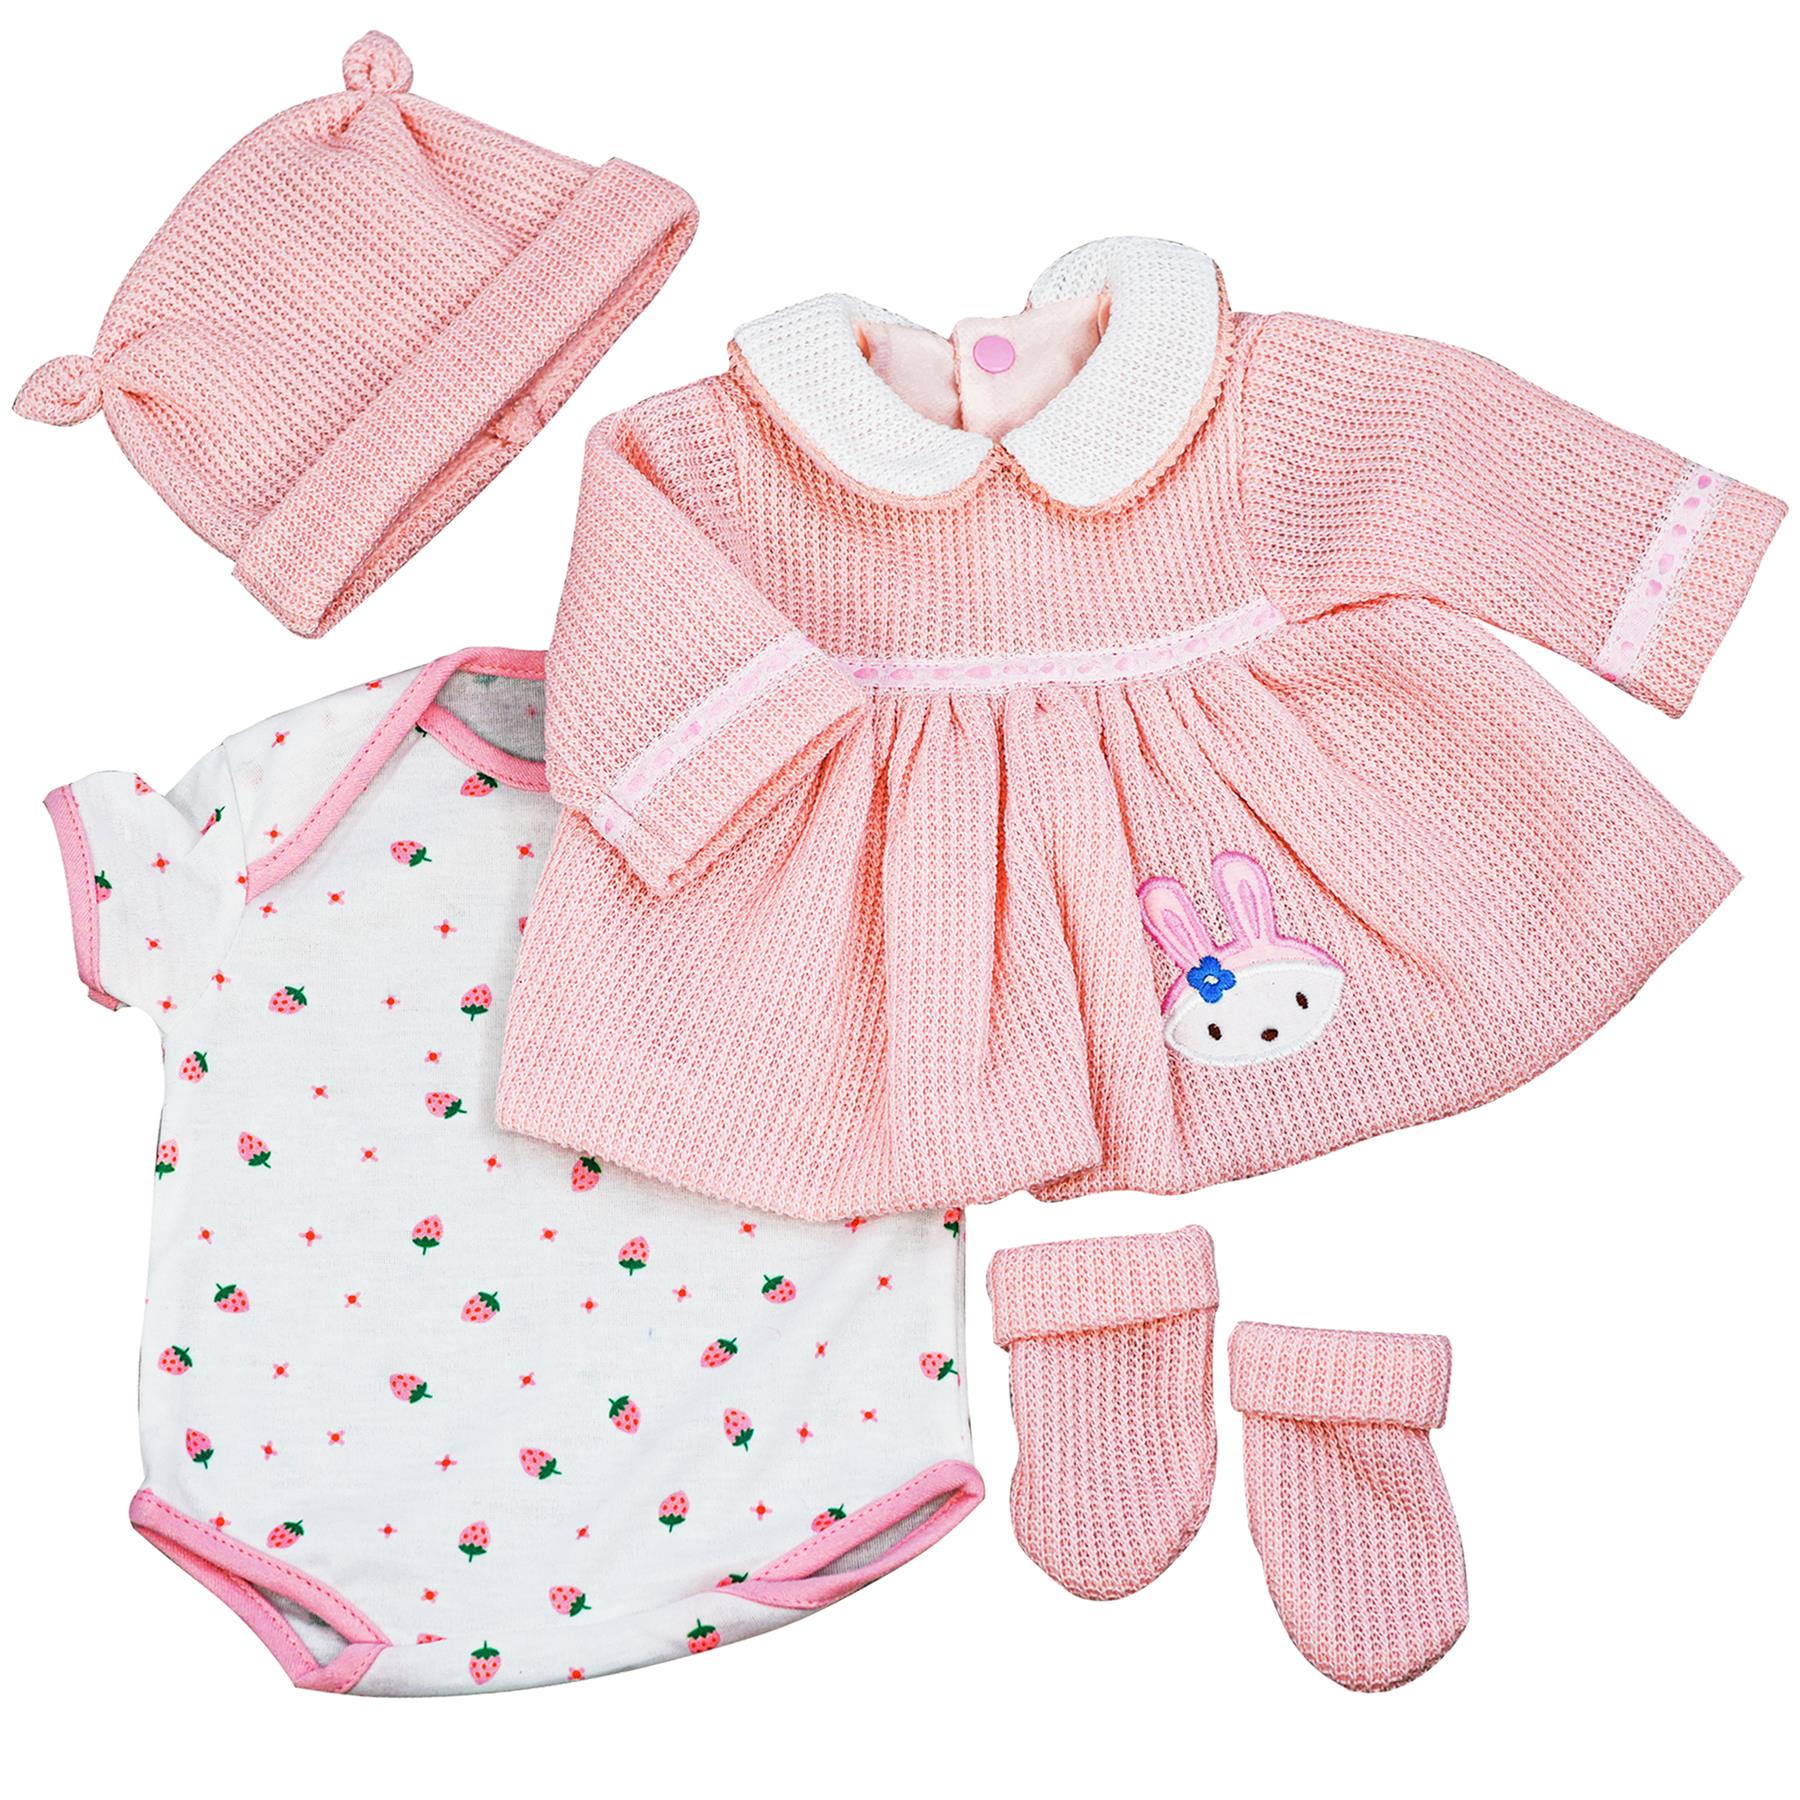 BiBi Outfits - Reborn Doll Clothes (Pink Dress) (50 cm / 20) by